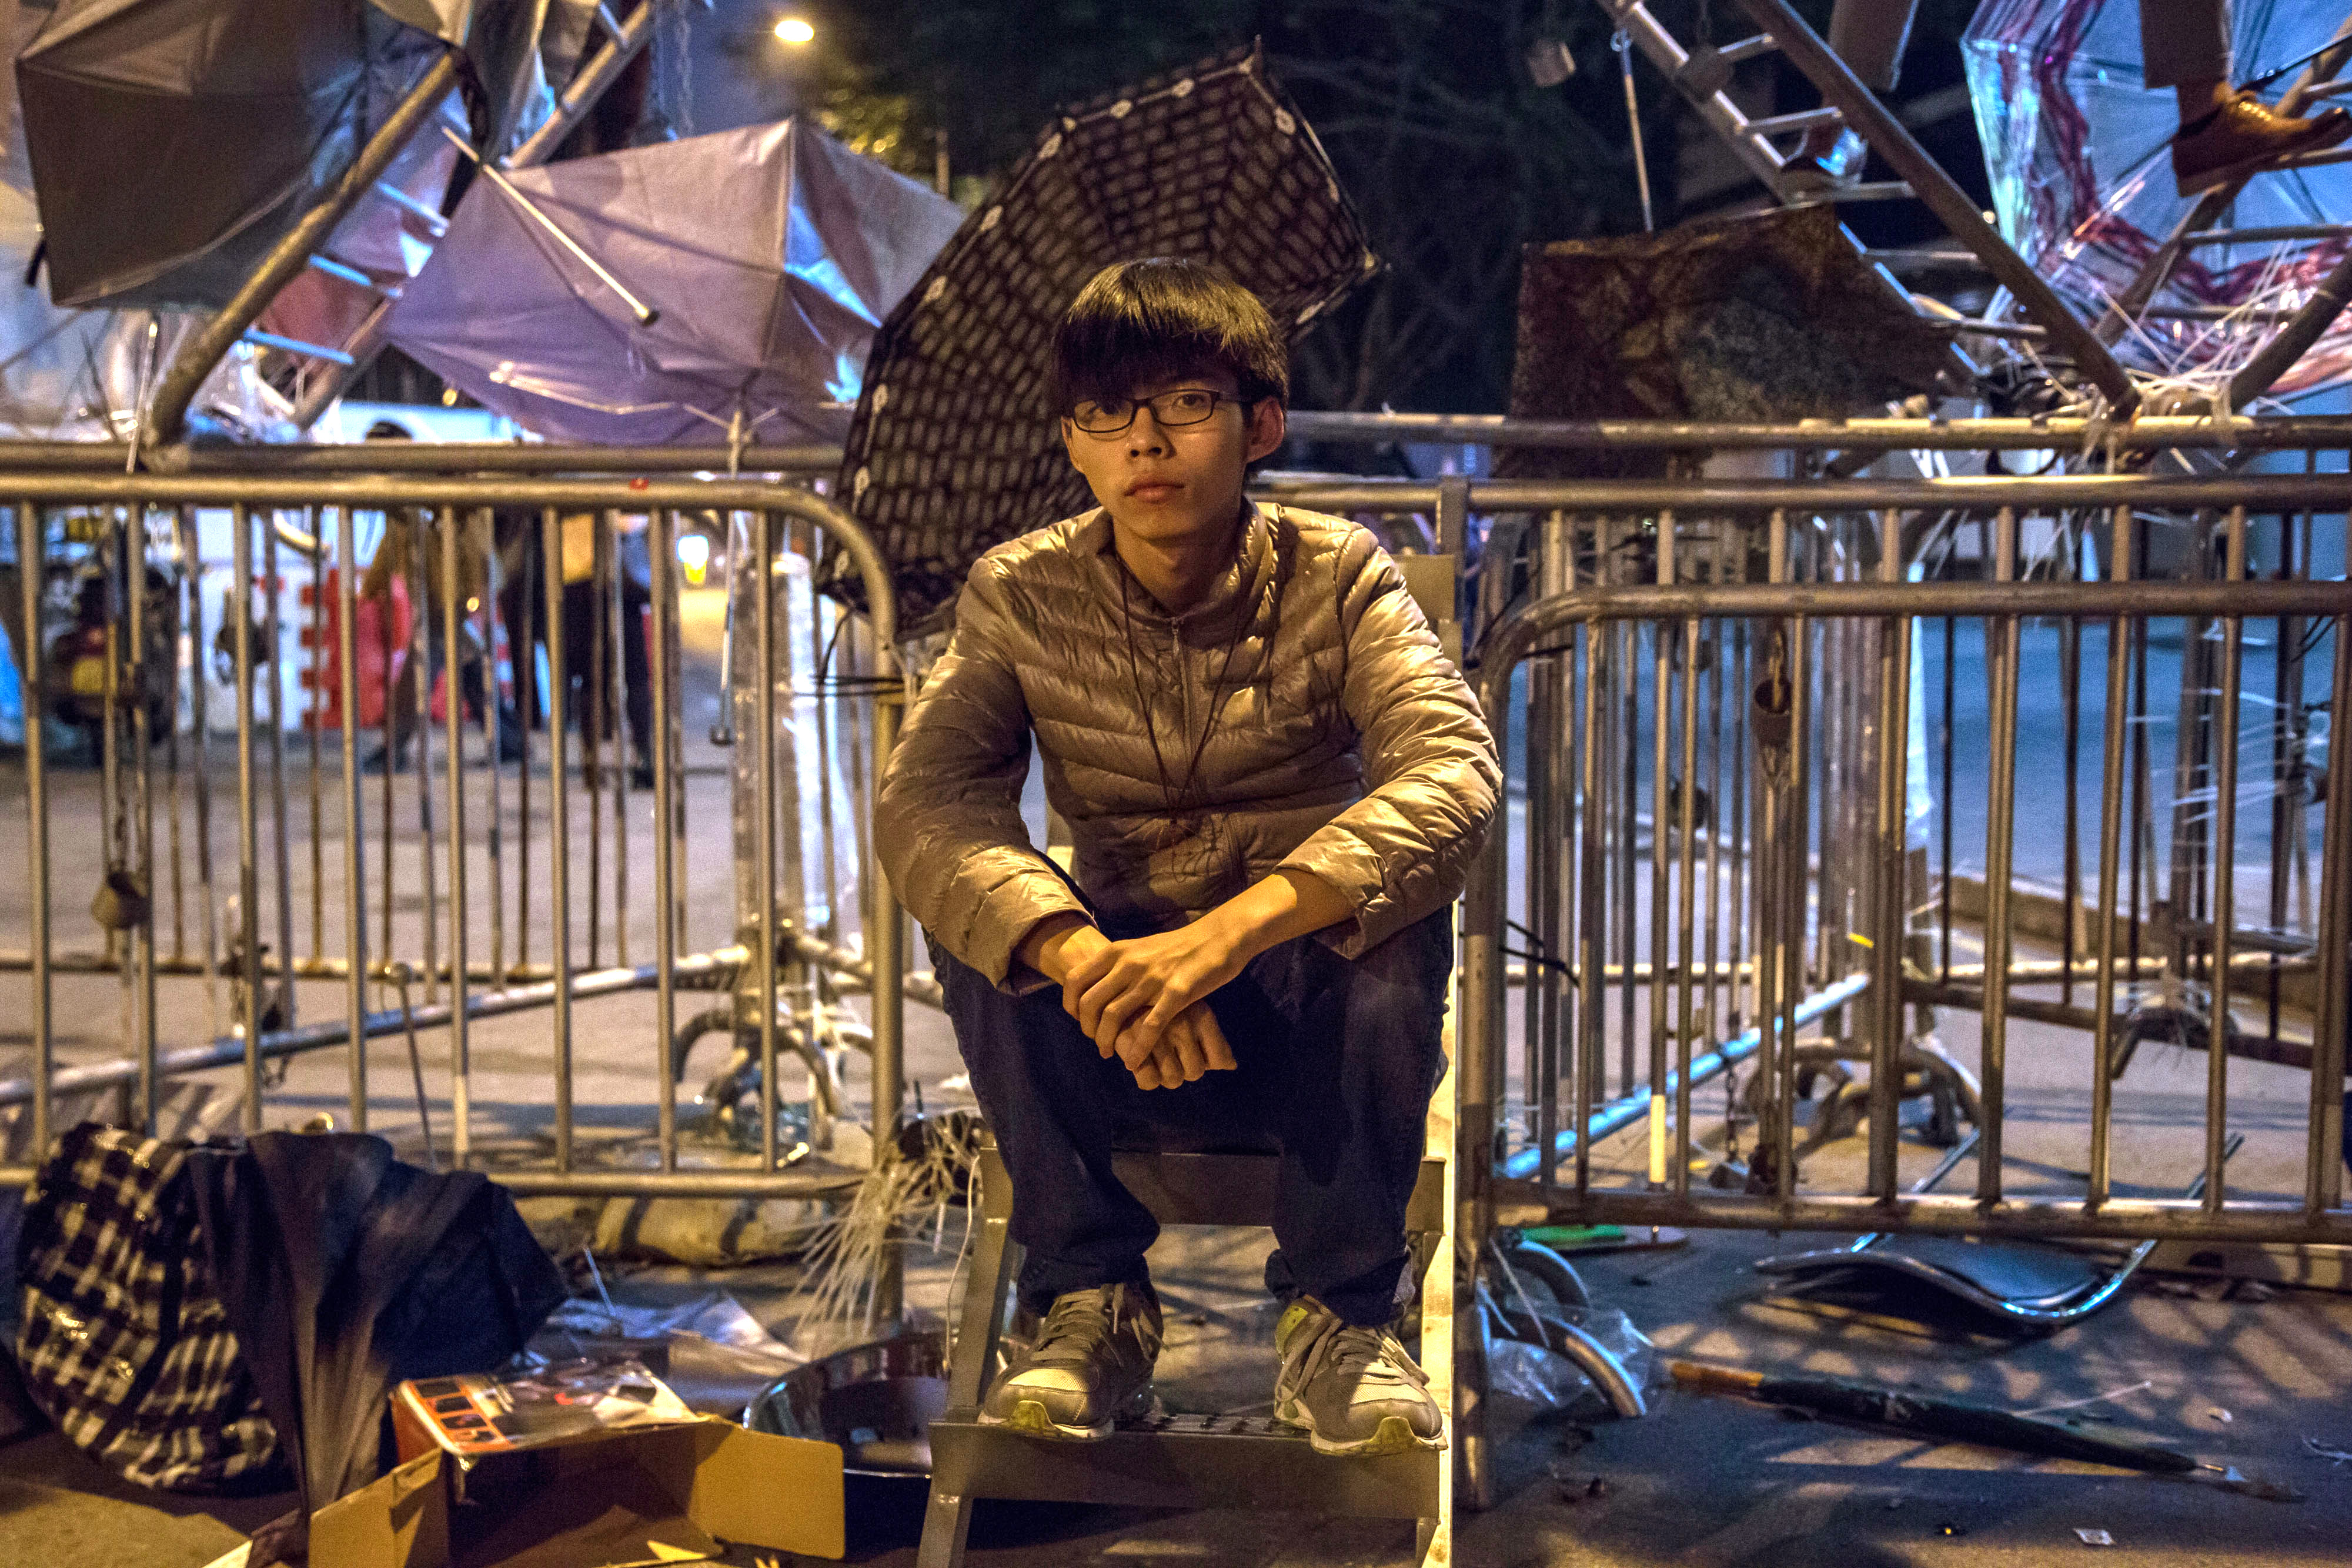 Joshua Wong, then 17, outside the Central Government Offices in Hong Kong on Dec. 10, 2014. (Lam Yik Fei—Bloomberg/Getty Images)